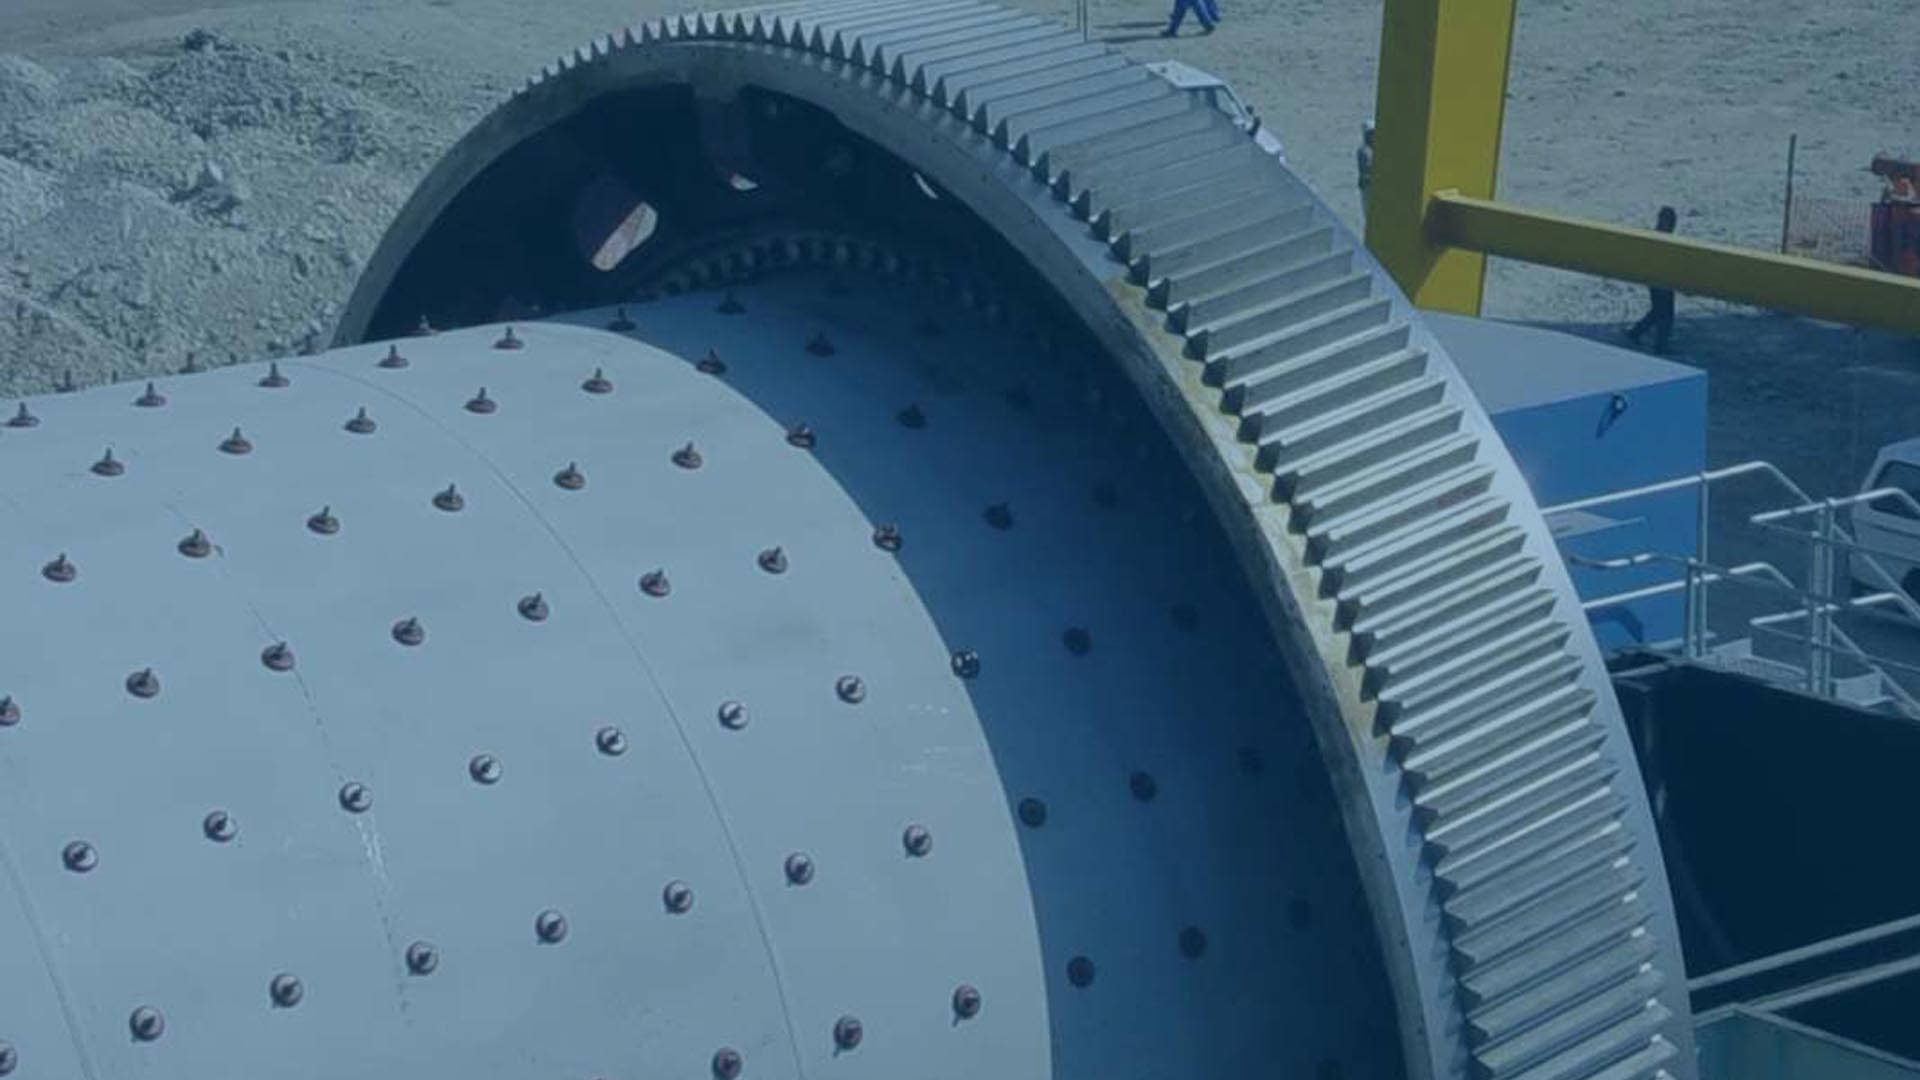 MILLCOOL<br> FOR WATER INJECTION TO THE BALL MILLS FROM 1ST OR 2ND CHAMBER